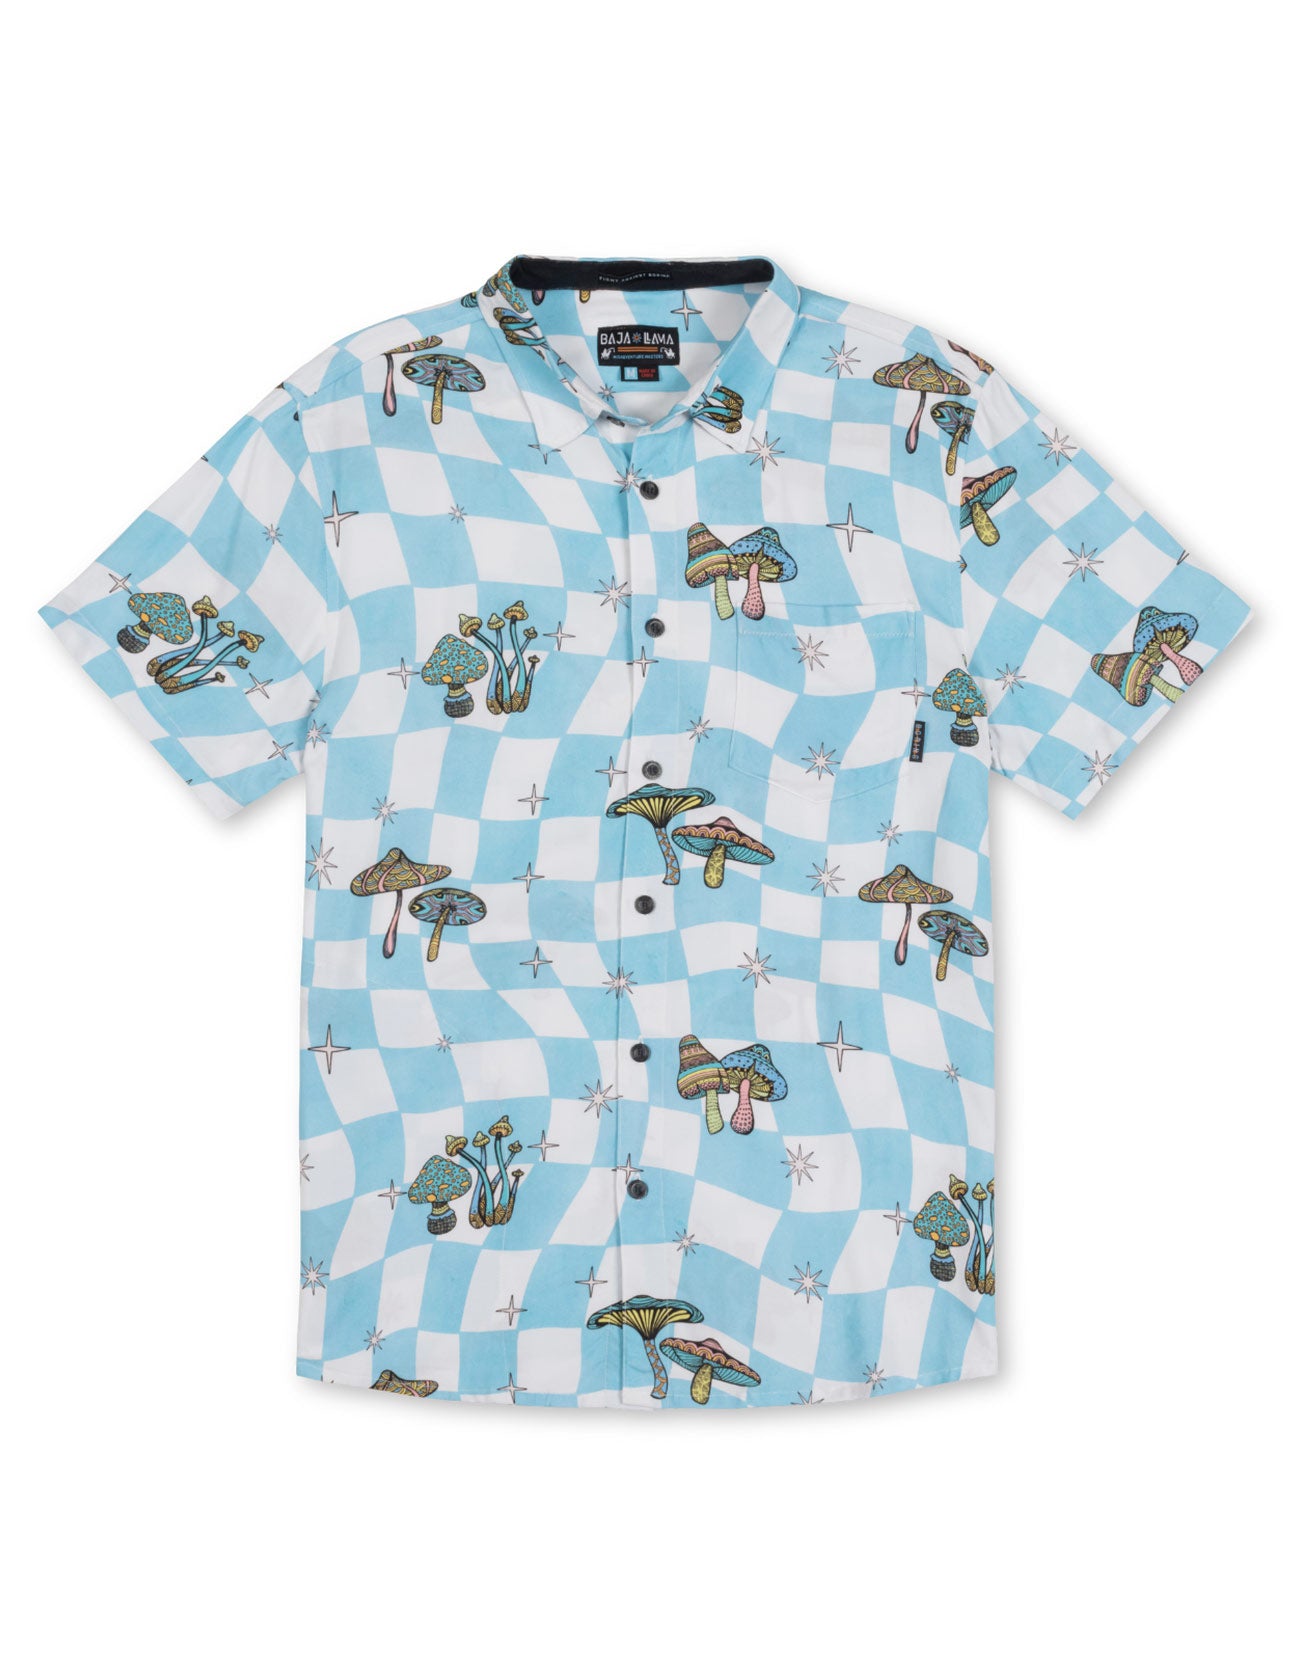 Light Blue checkered button up shirt with psychedelic mushroom print in rainbow colors